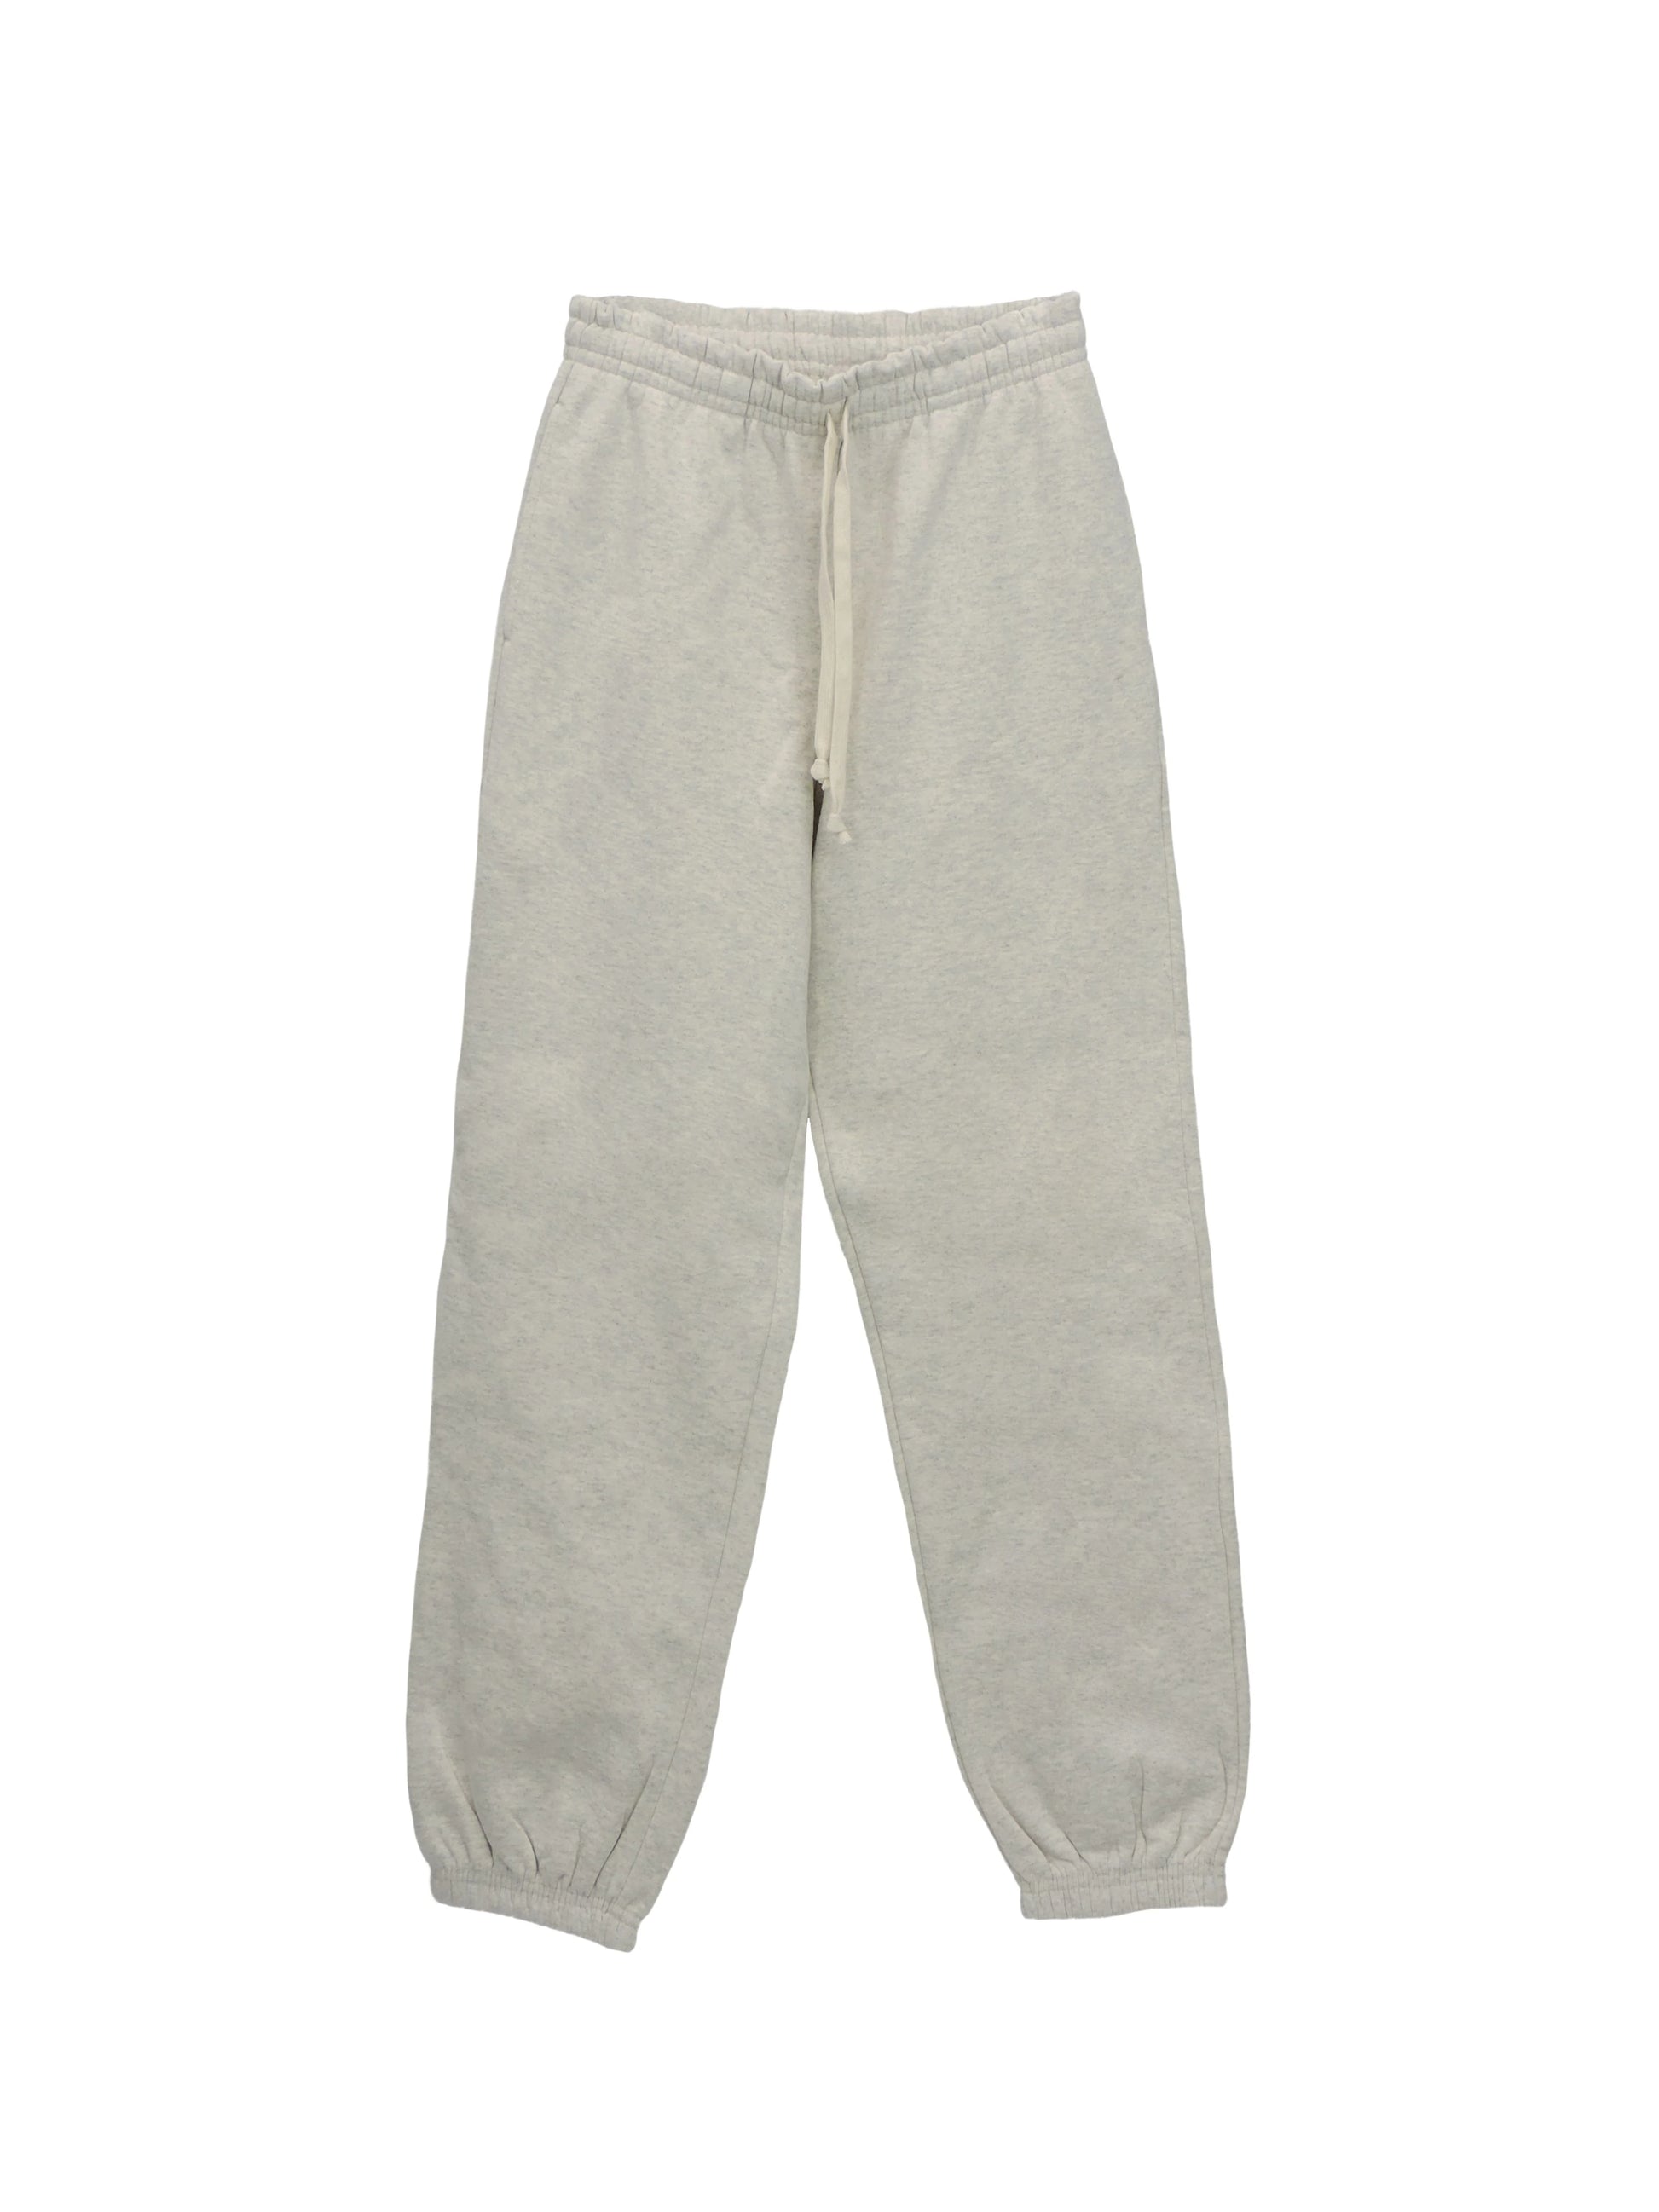 Oatmeal Fleece Sweatpants with Drawstrings and elastic ankle cuffs